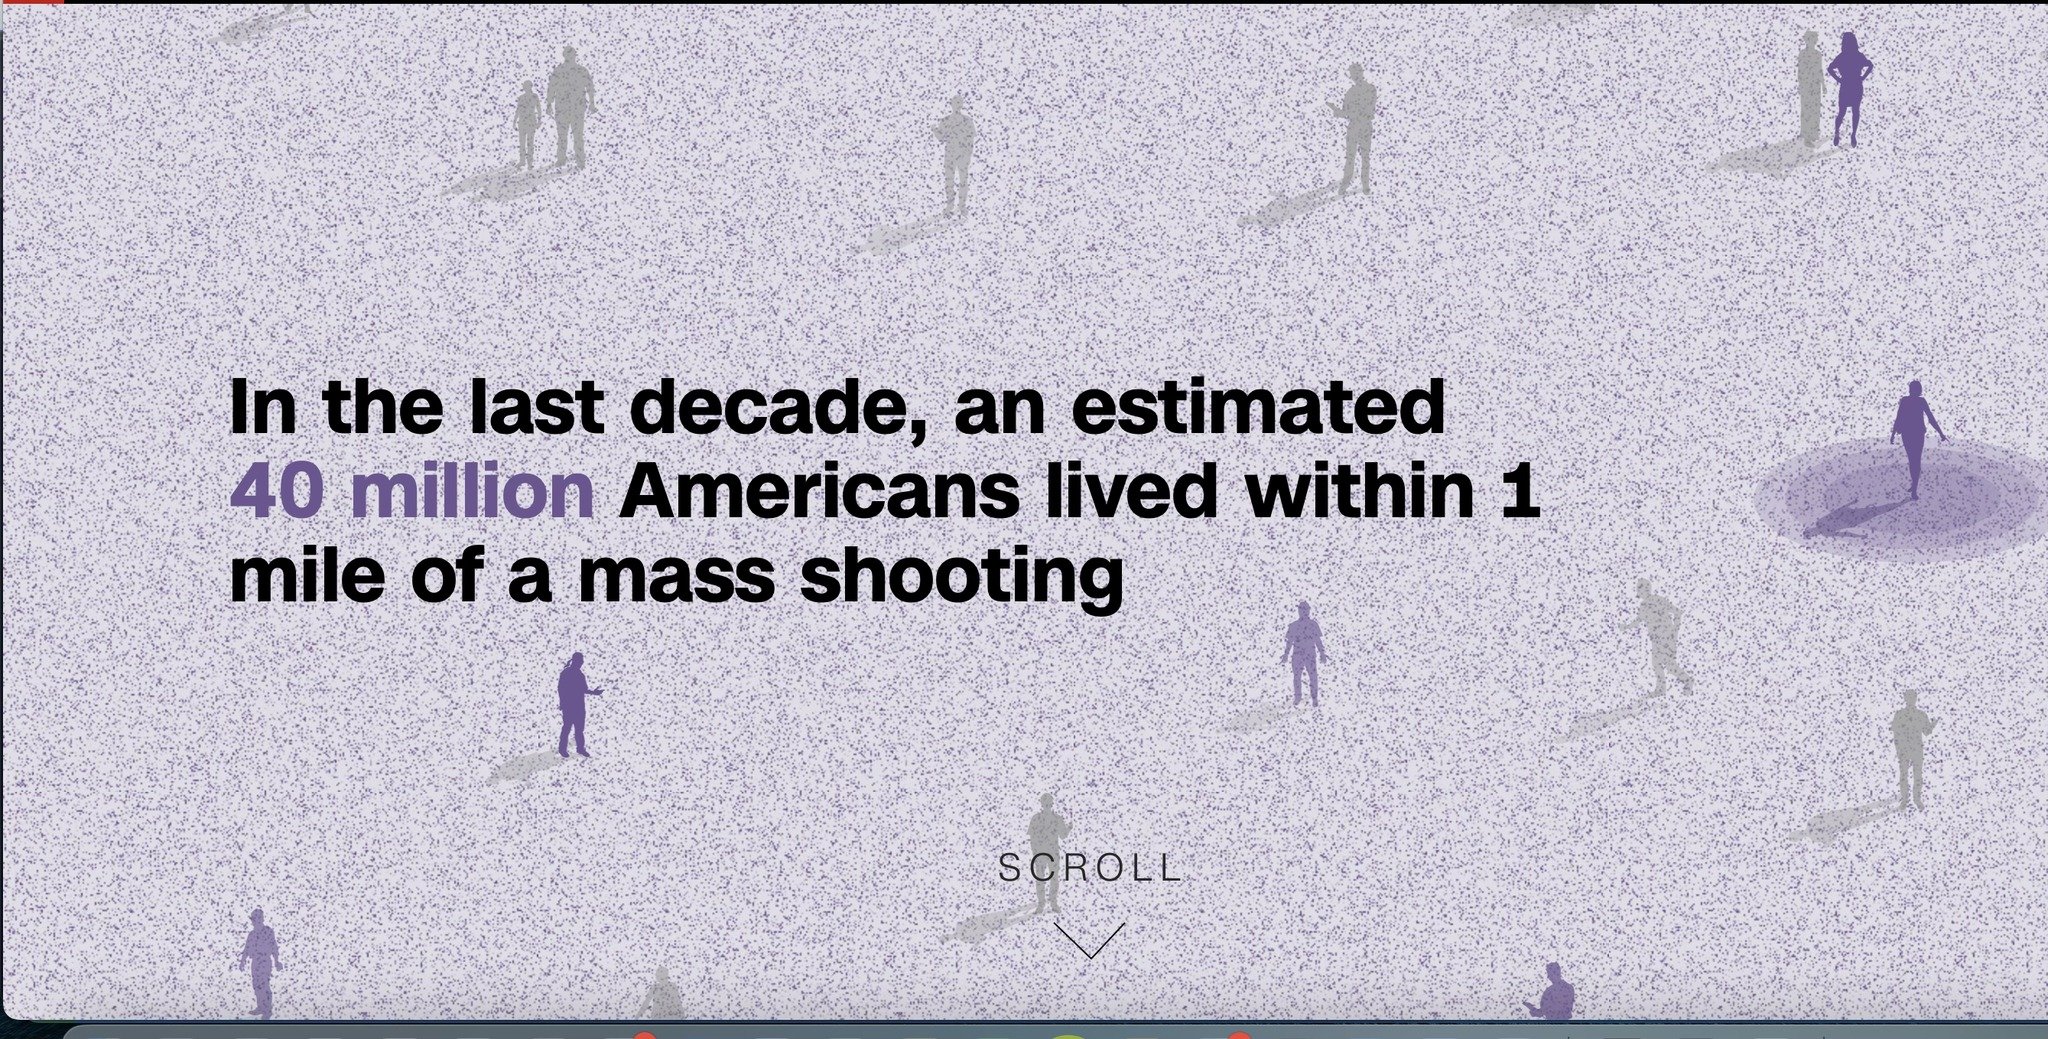 In the last decade, an estimated 40 million Americans lived within 1 mile of a mass shooting (CNN)